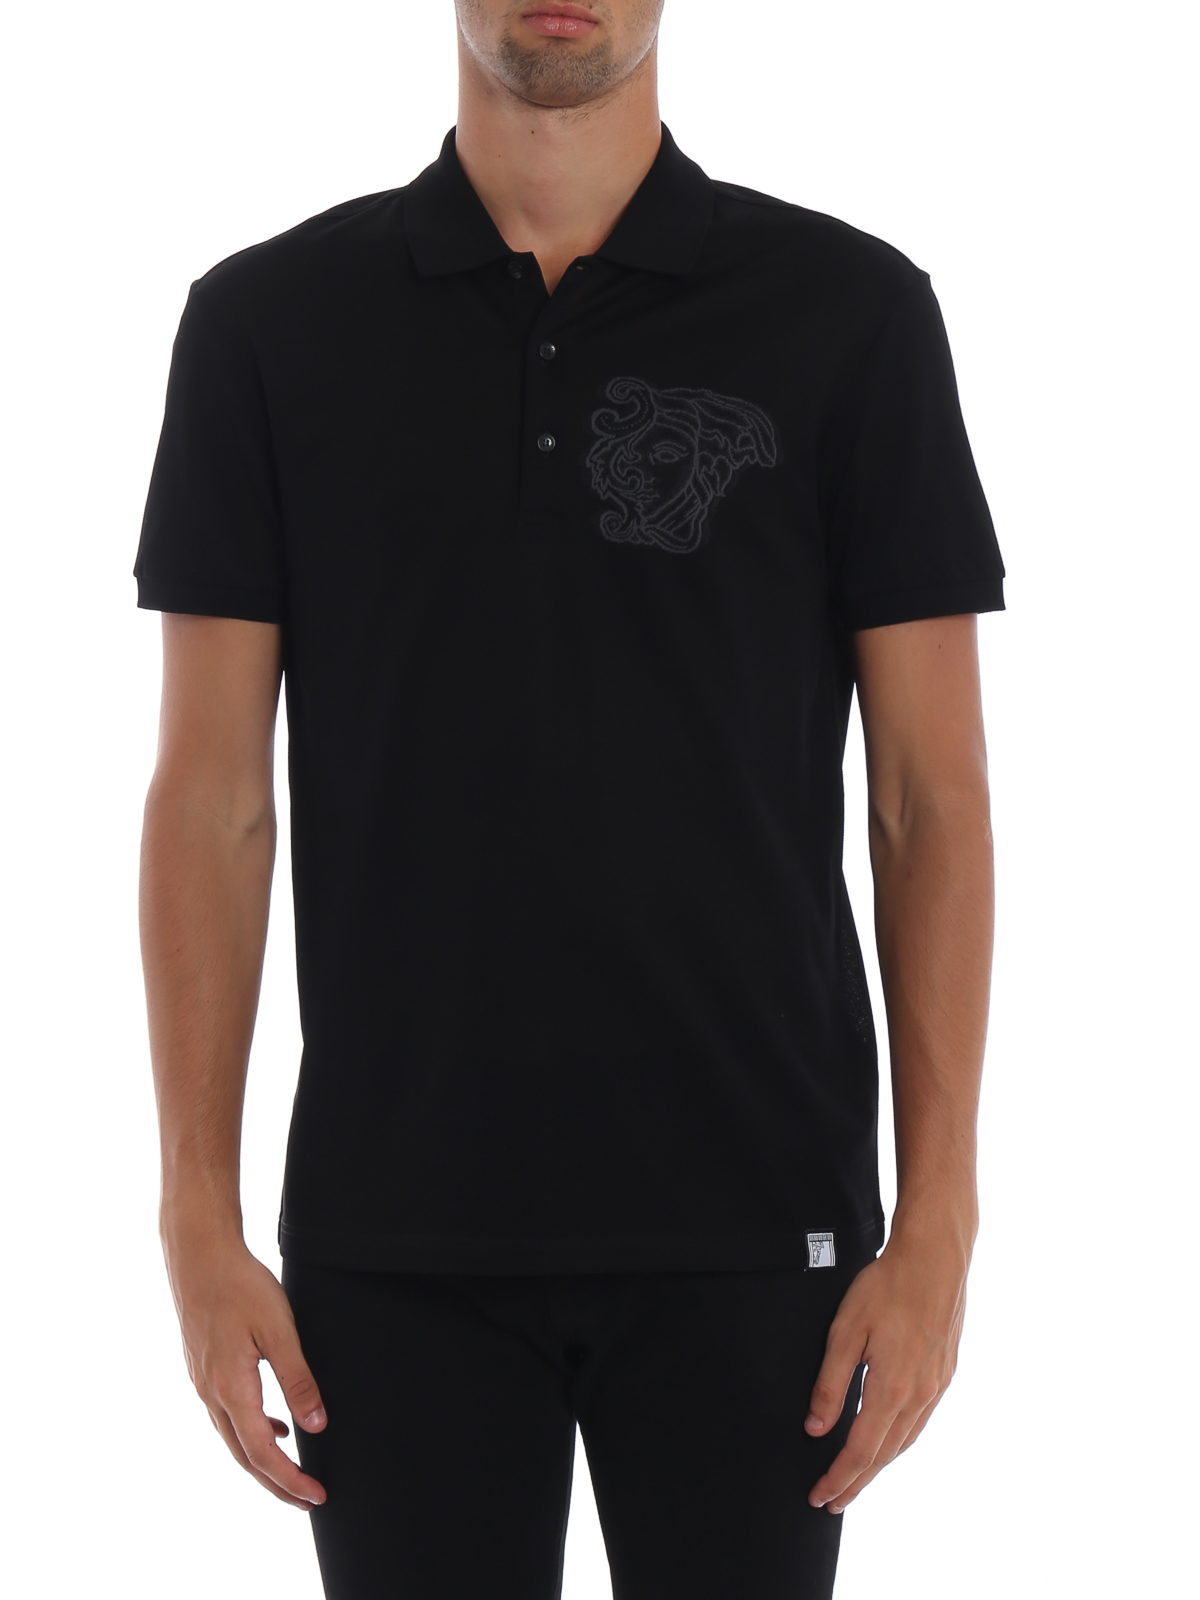 versace collection polo, OFF 77%,Buy!